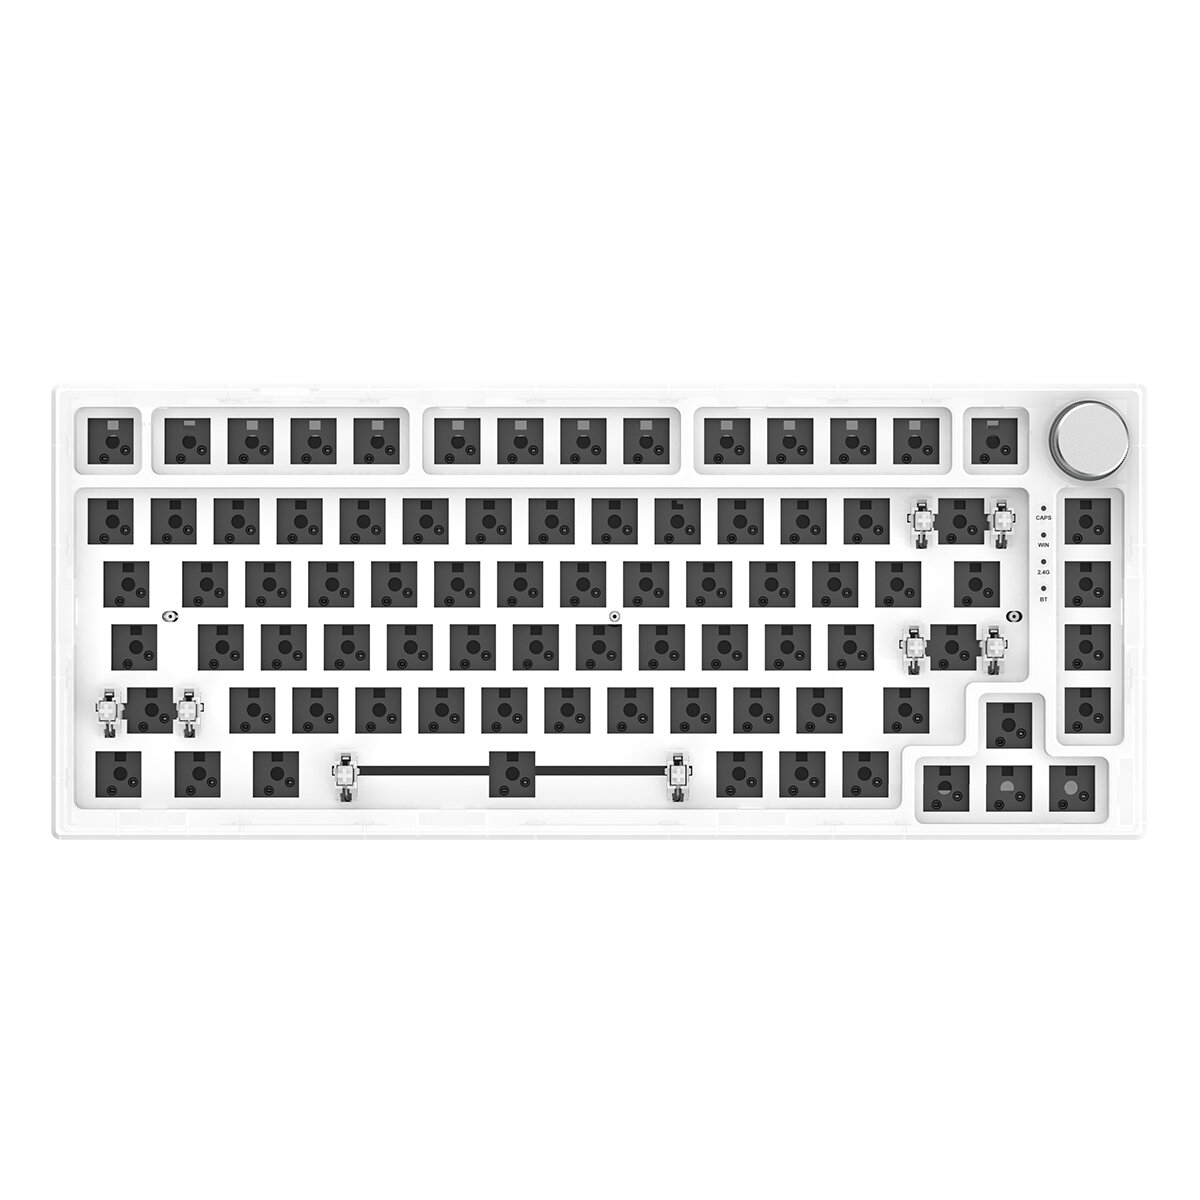 FEKER IK75 Keyboard Customized Kit 82 Keys Hot Swappable 75% RGB Wired bluetooth 5.0 2.4GHz Triple Mode PCB Mounting Pla